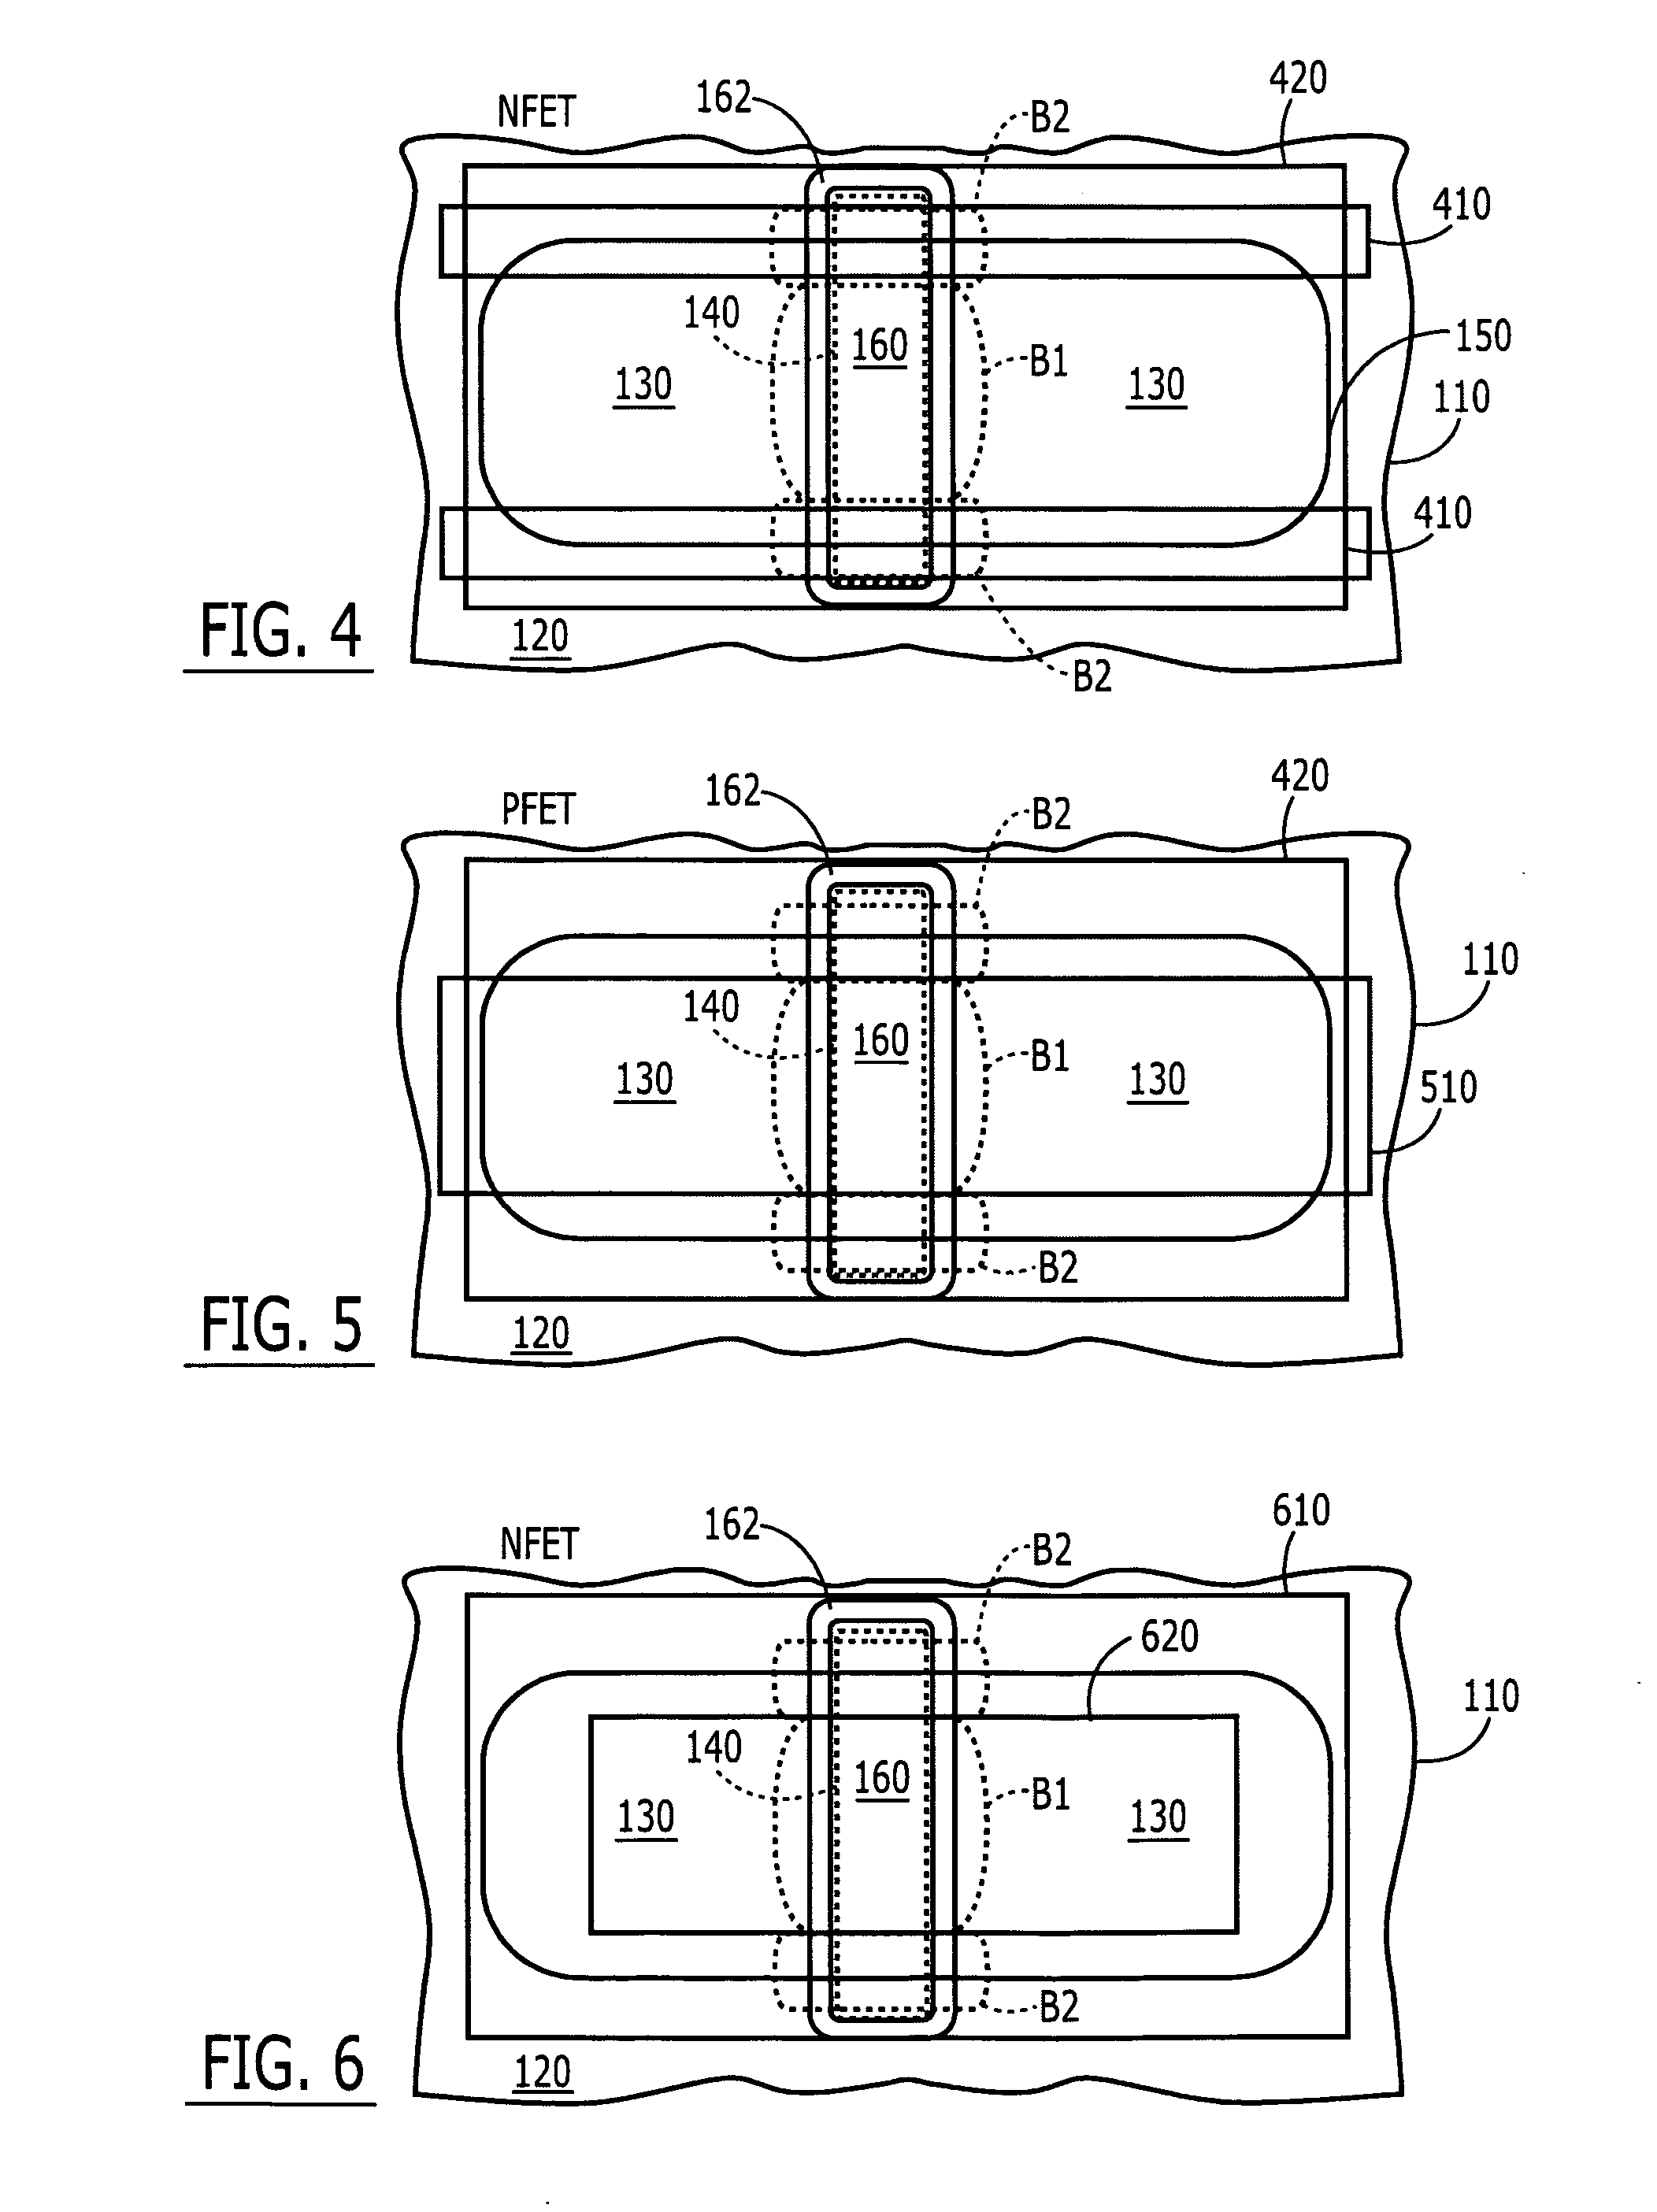 Differential mechanical stress-producing regions for integrated circuit field effect transistors